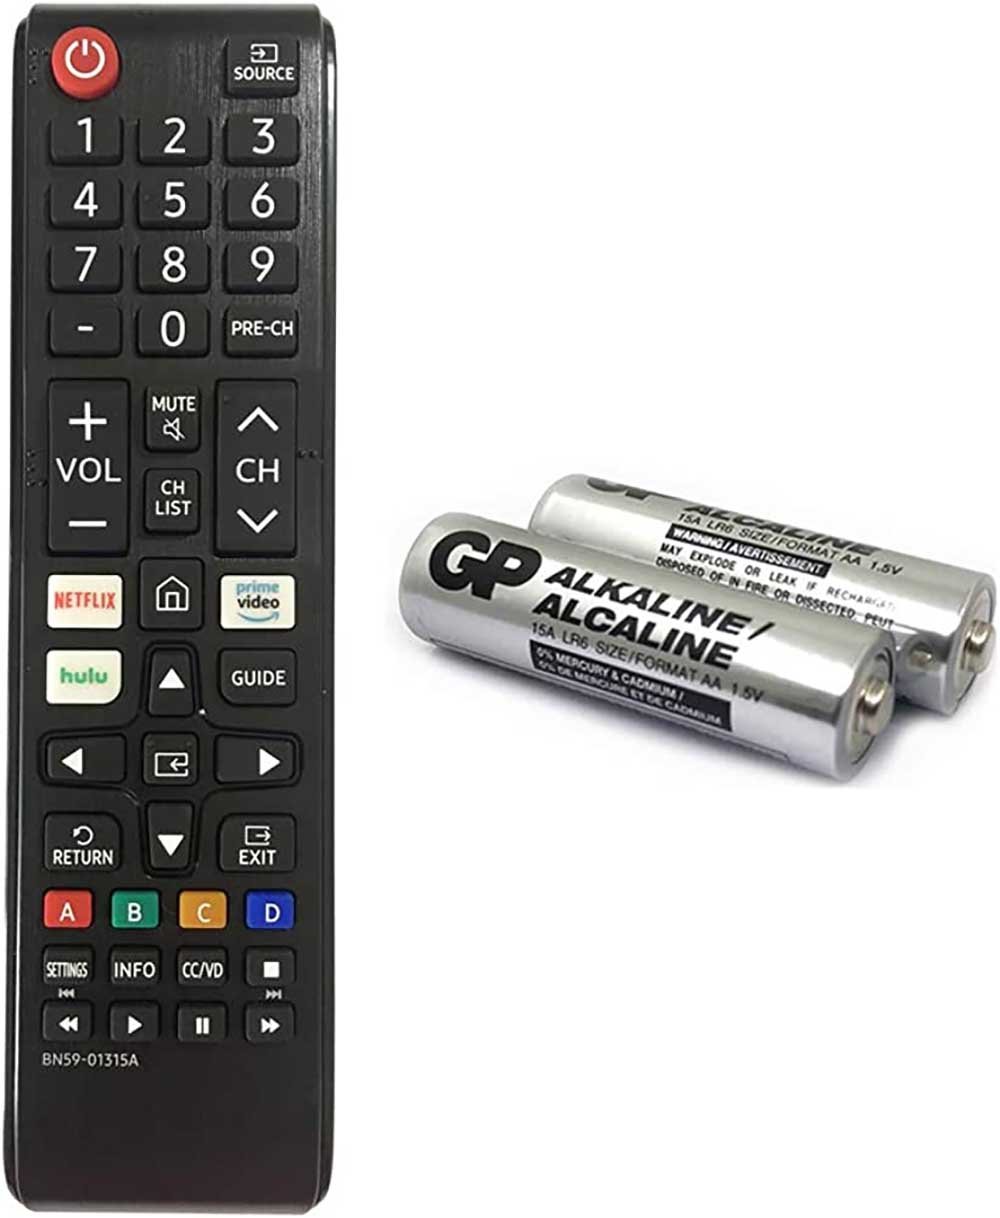 remove battery from samsung smart tv remote.jpg